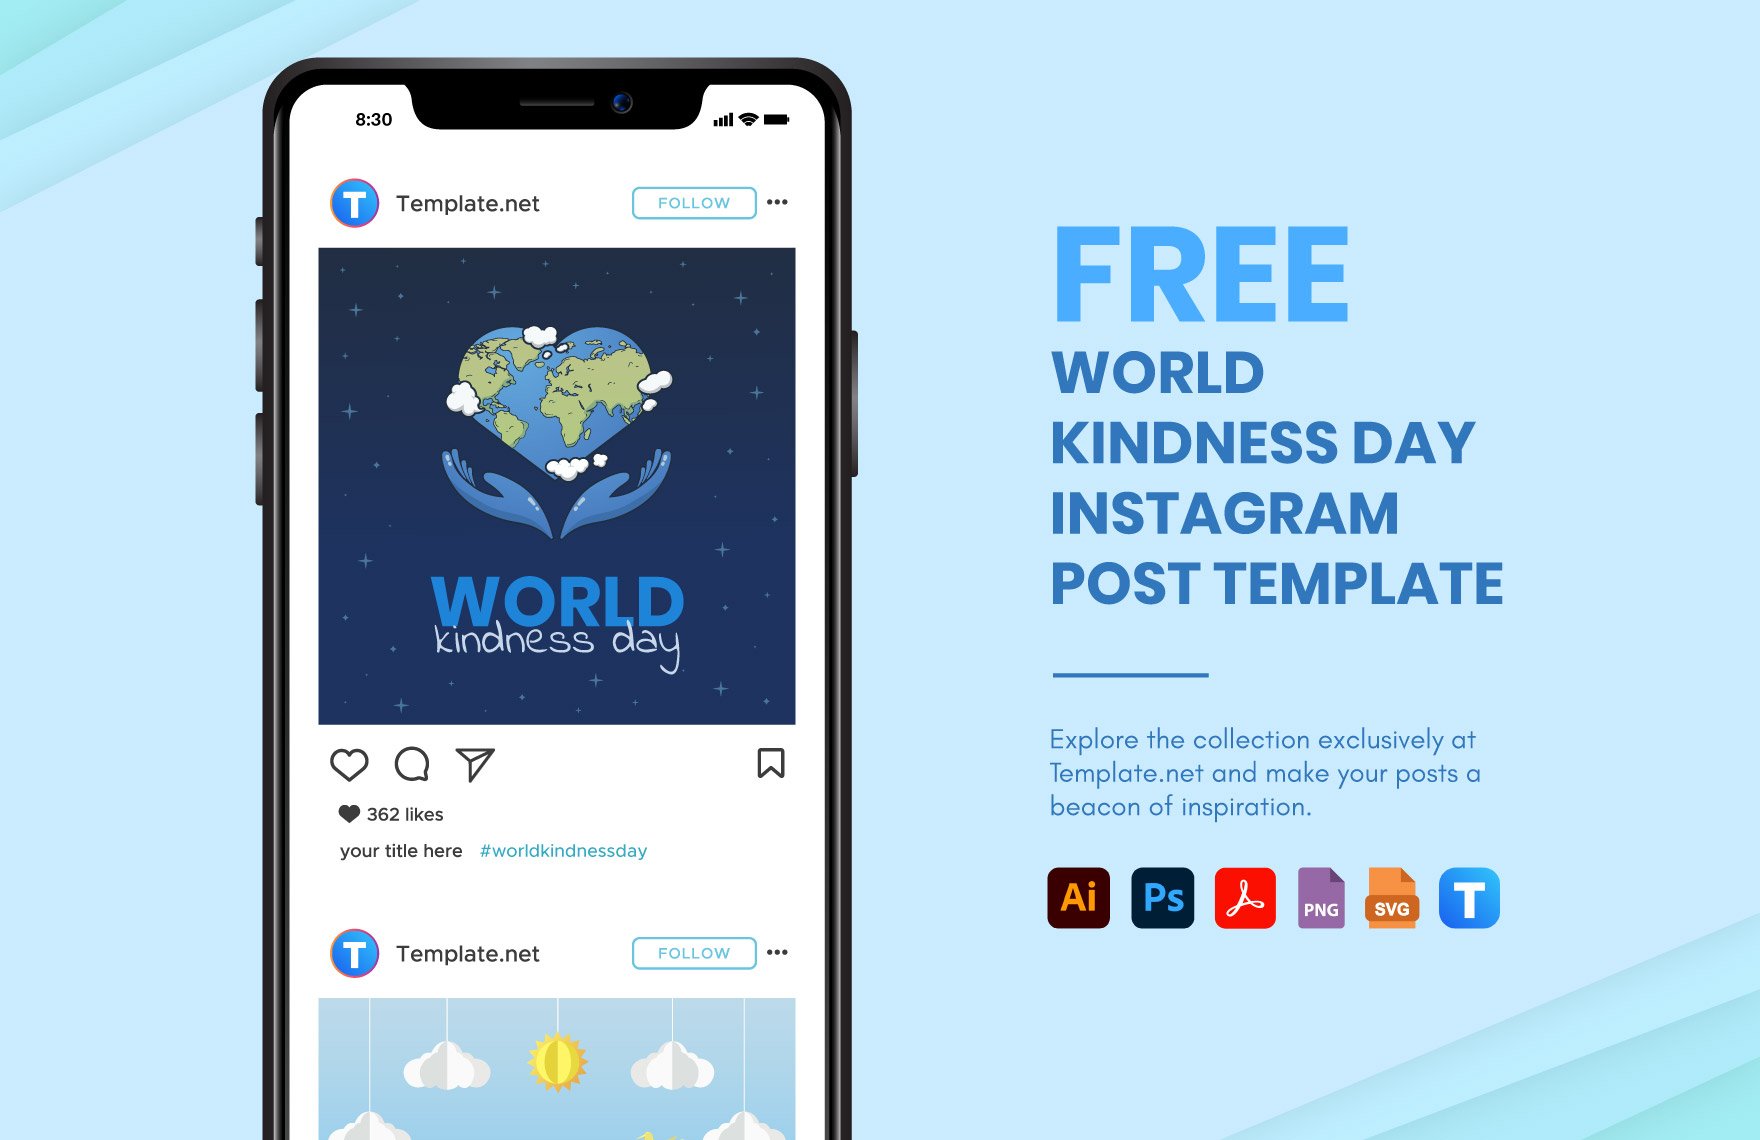 Free World Kindness Day Instagram Post Template in PDF, Illustrator, PSD, SVG, PNG